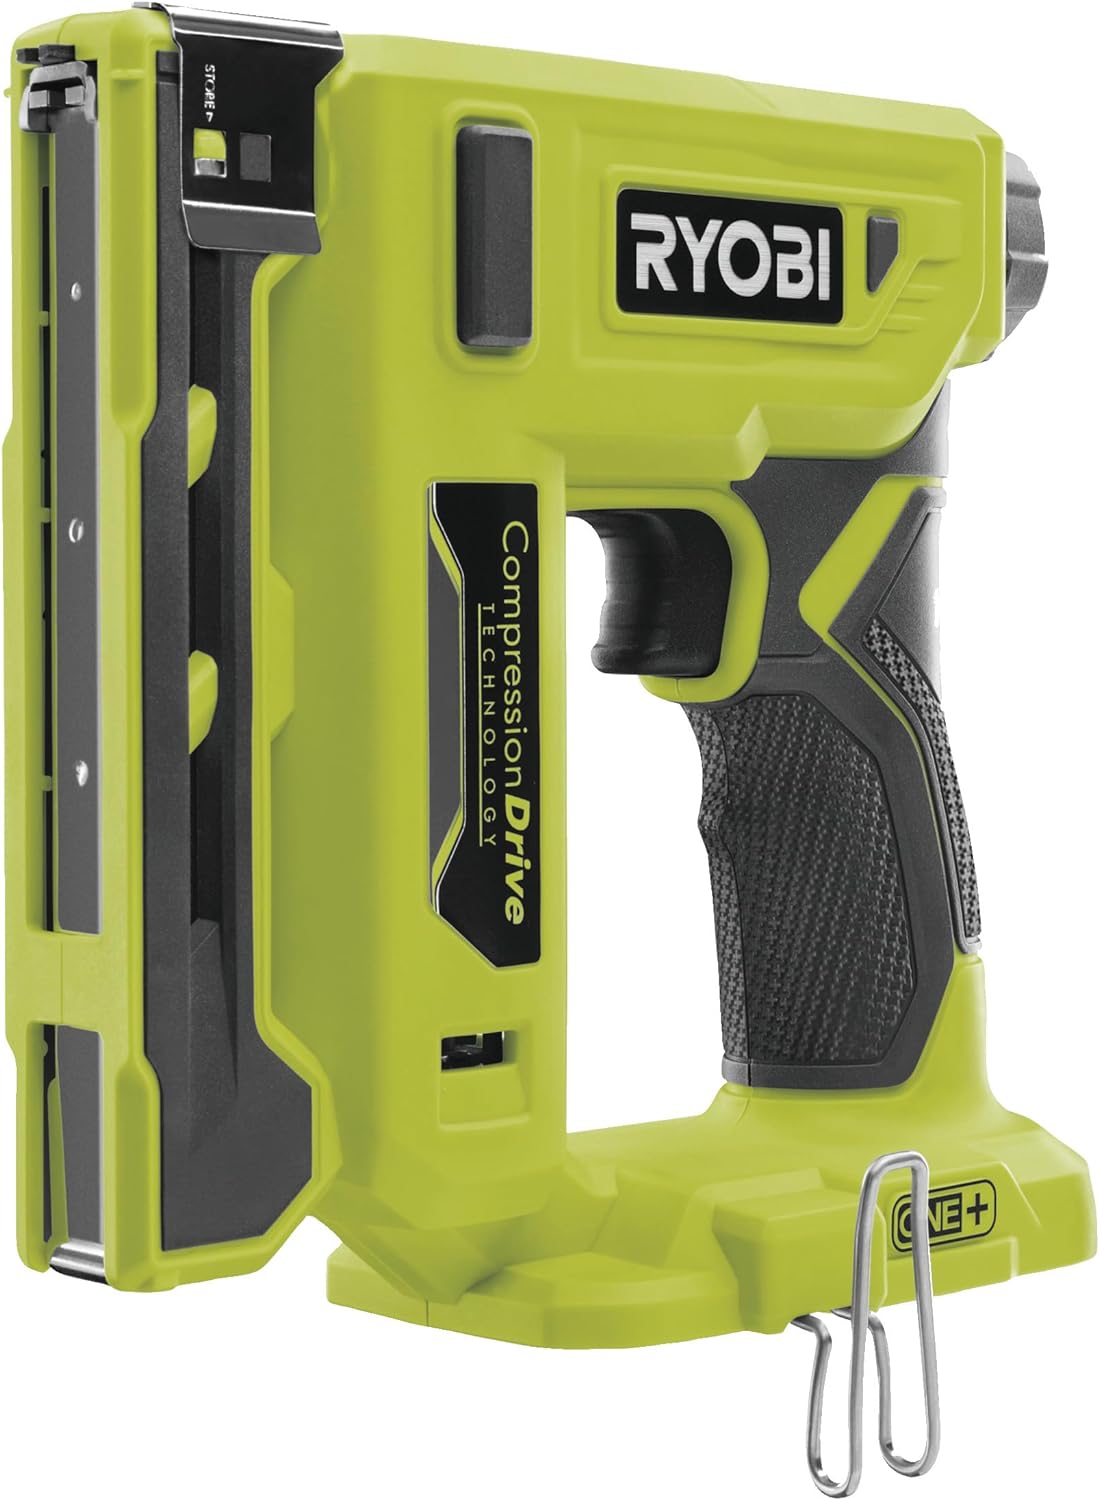 Ryobi 18-Volt One+ Cordless Compression Drive 3/8 In. Crown Stapler (Tool Only) P317